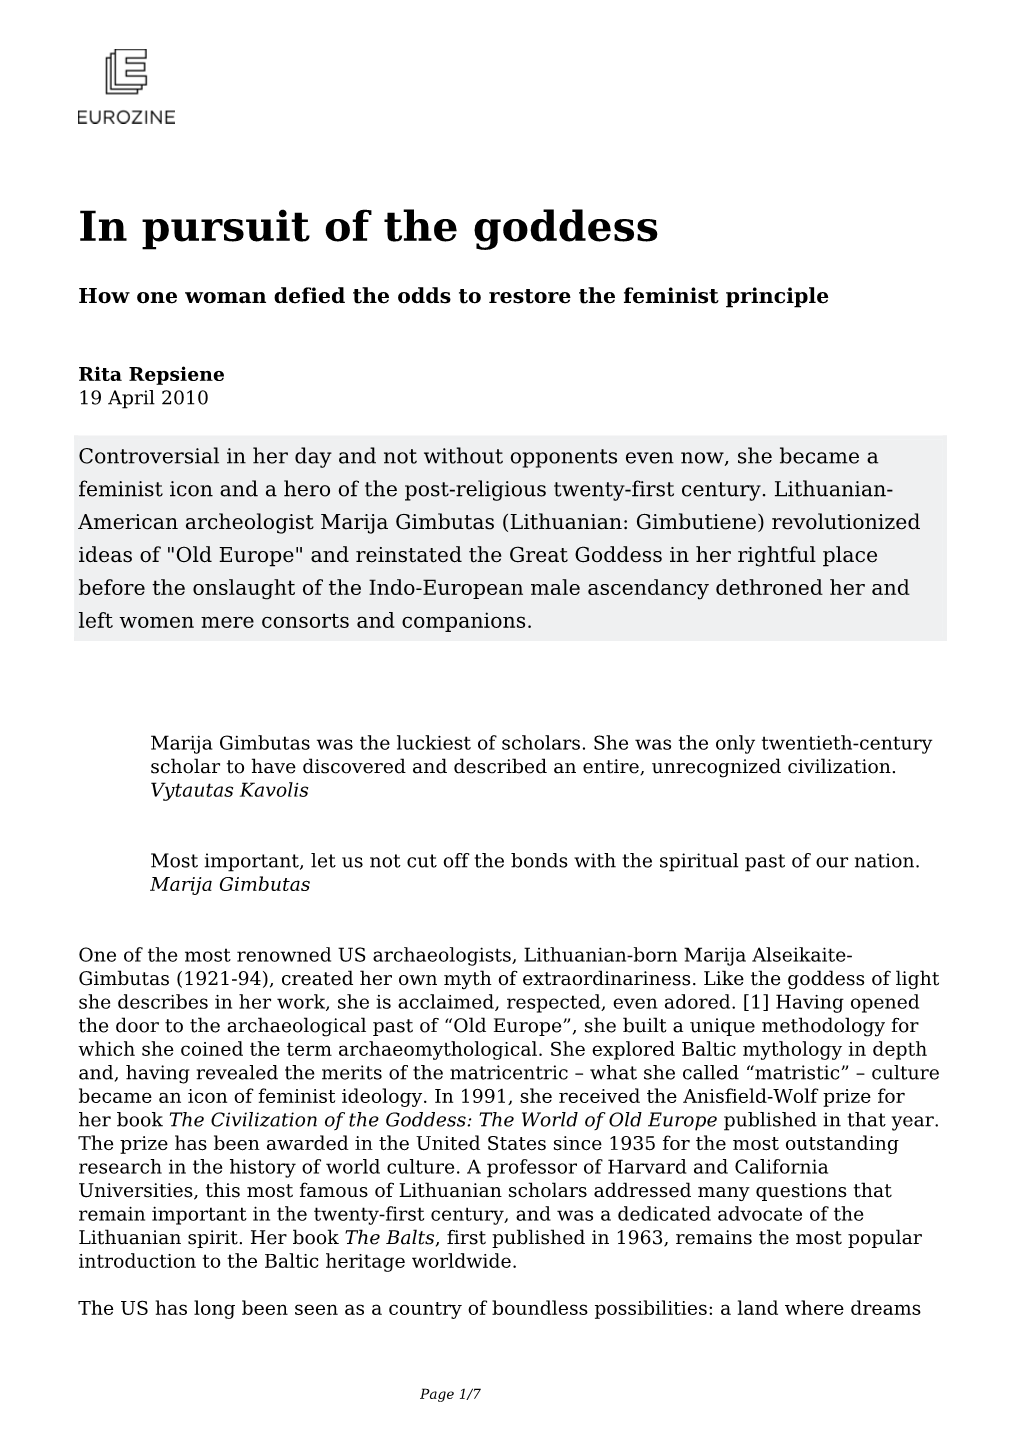 In Pursuit of the Goddess